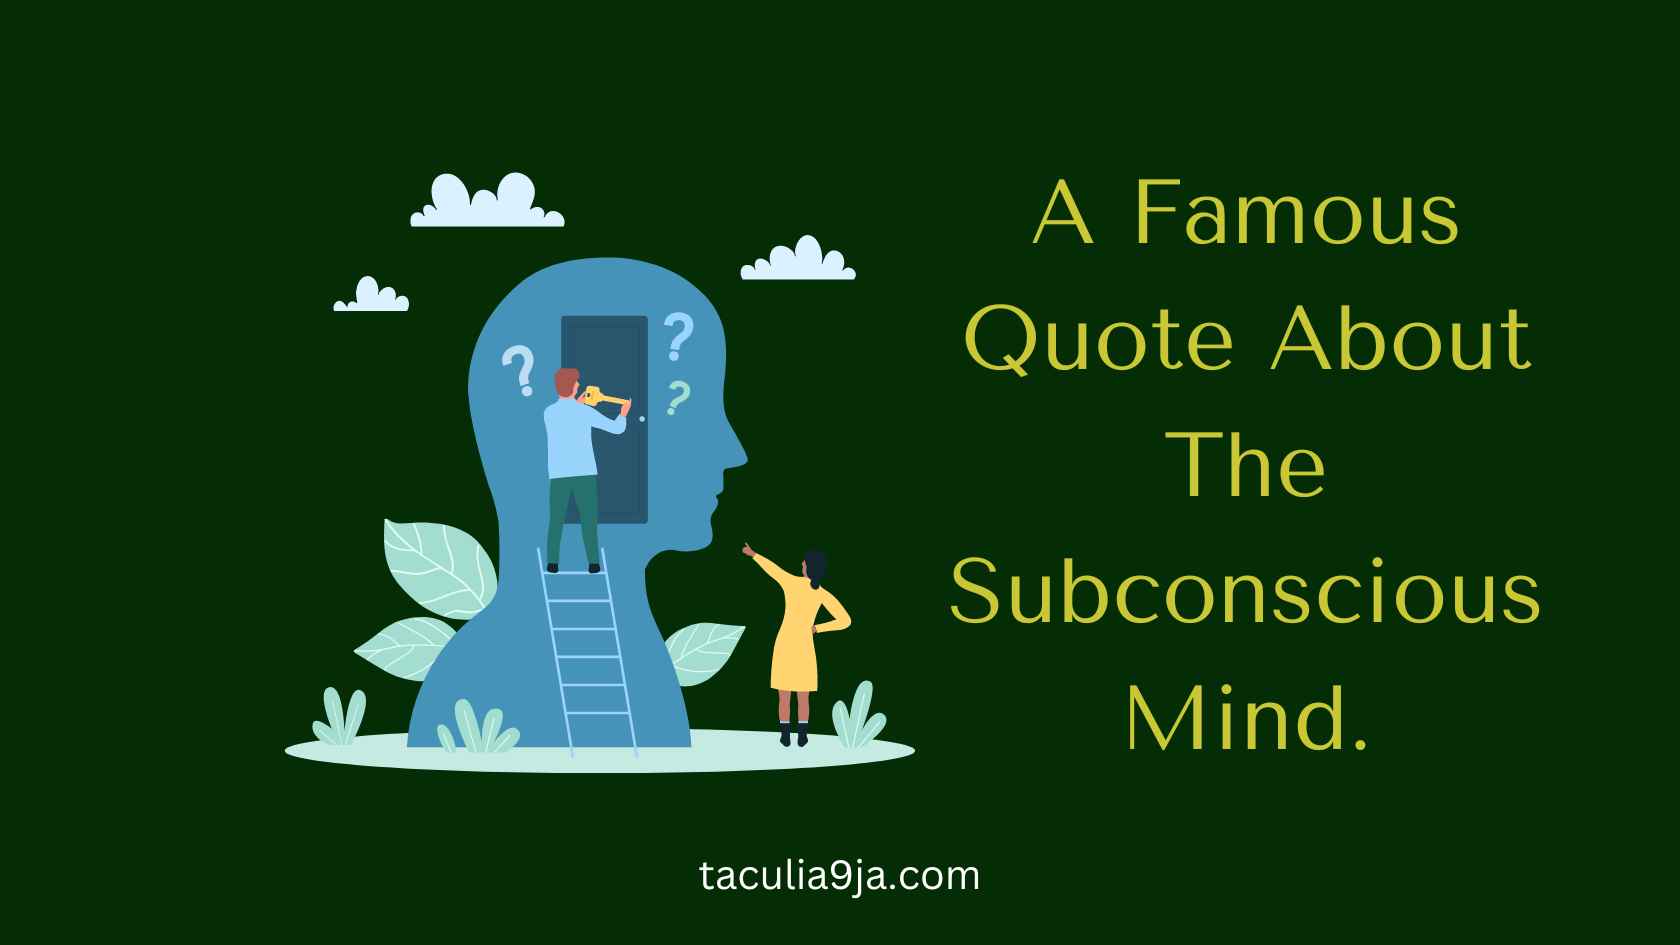 a famous quote about the subconscious mind